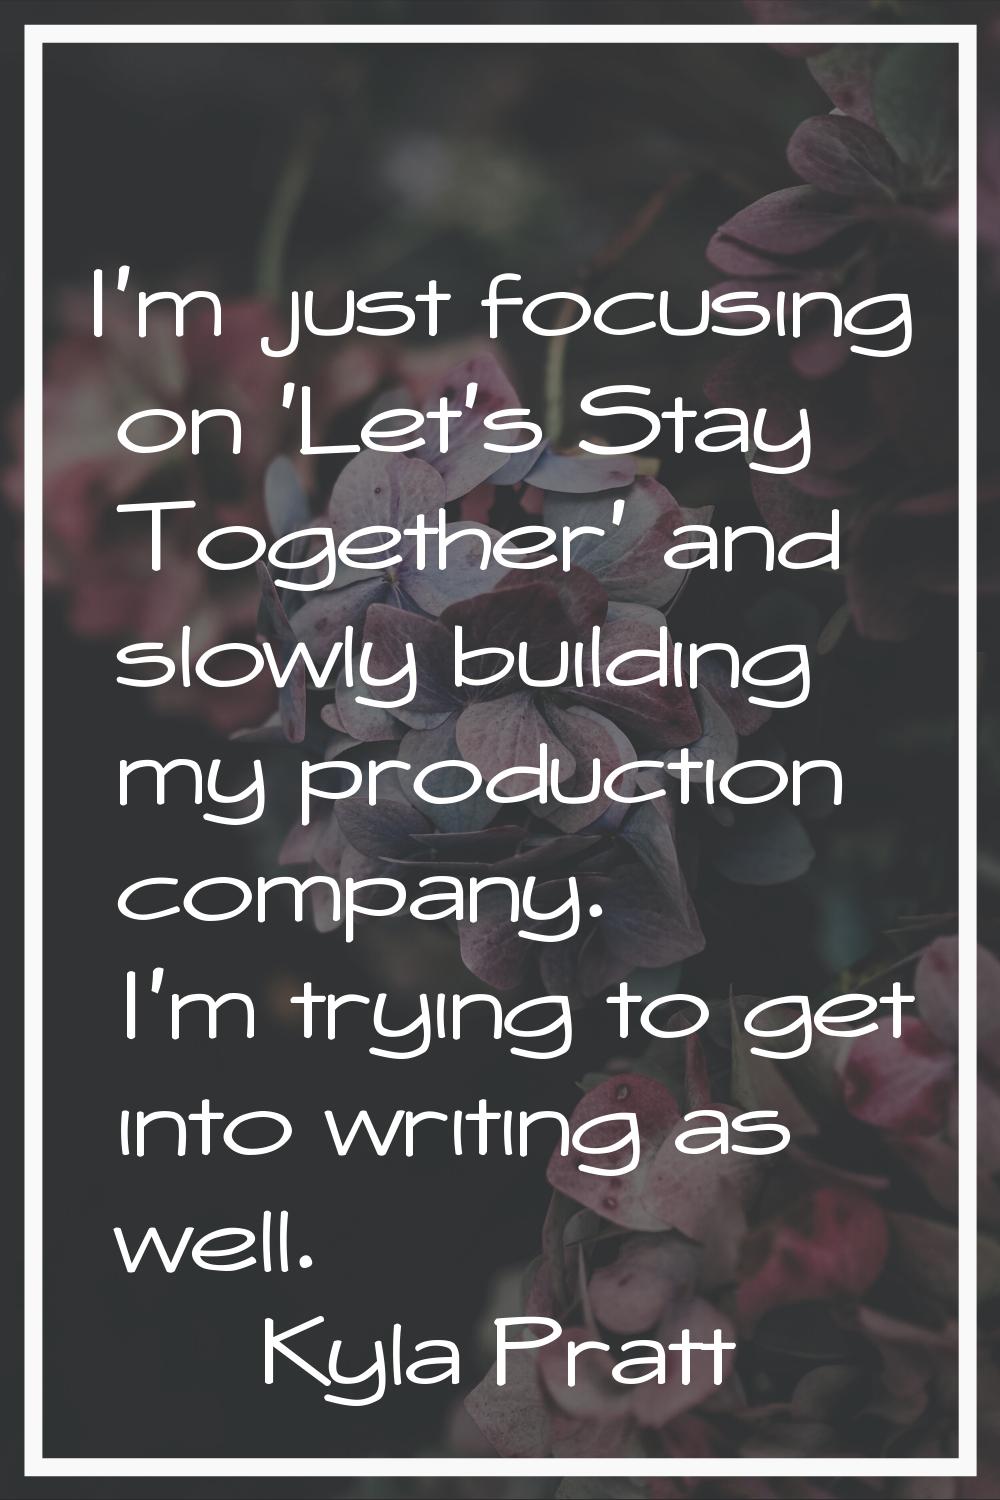 I'm just focusing on 'Let's Stay Together' and slowly building my production company. I'm trying to